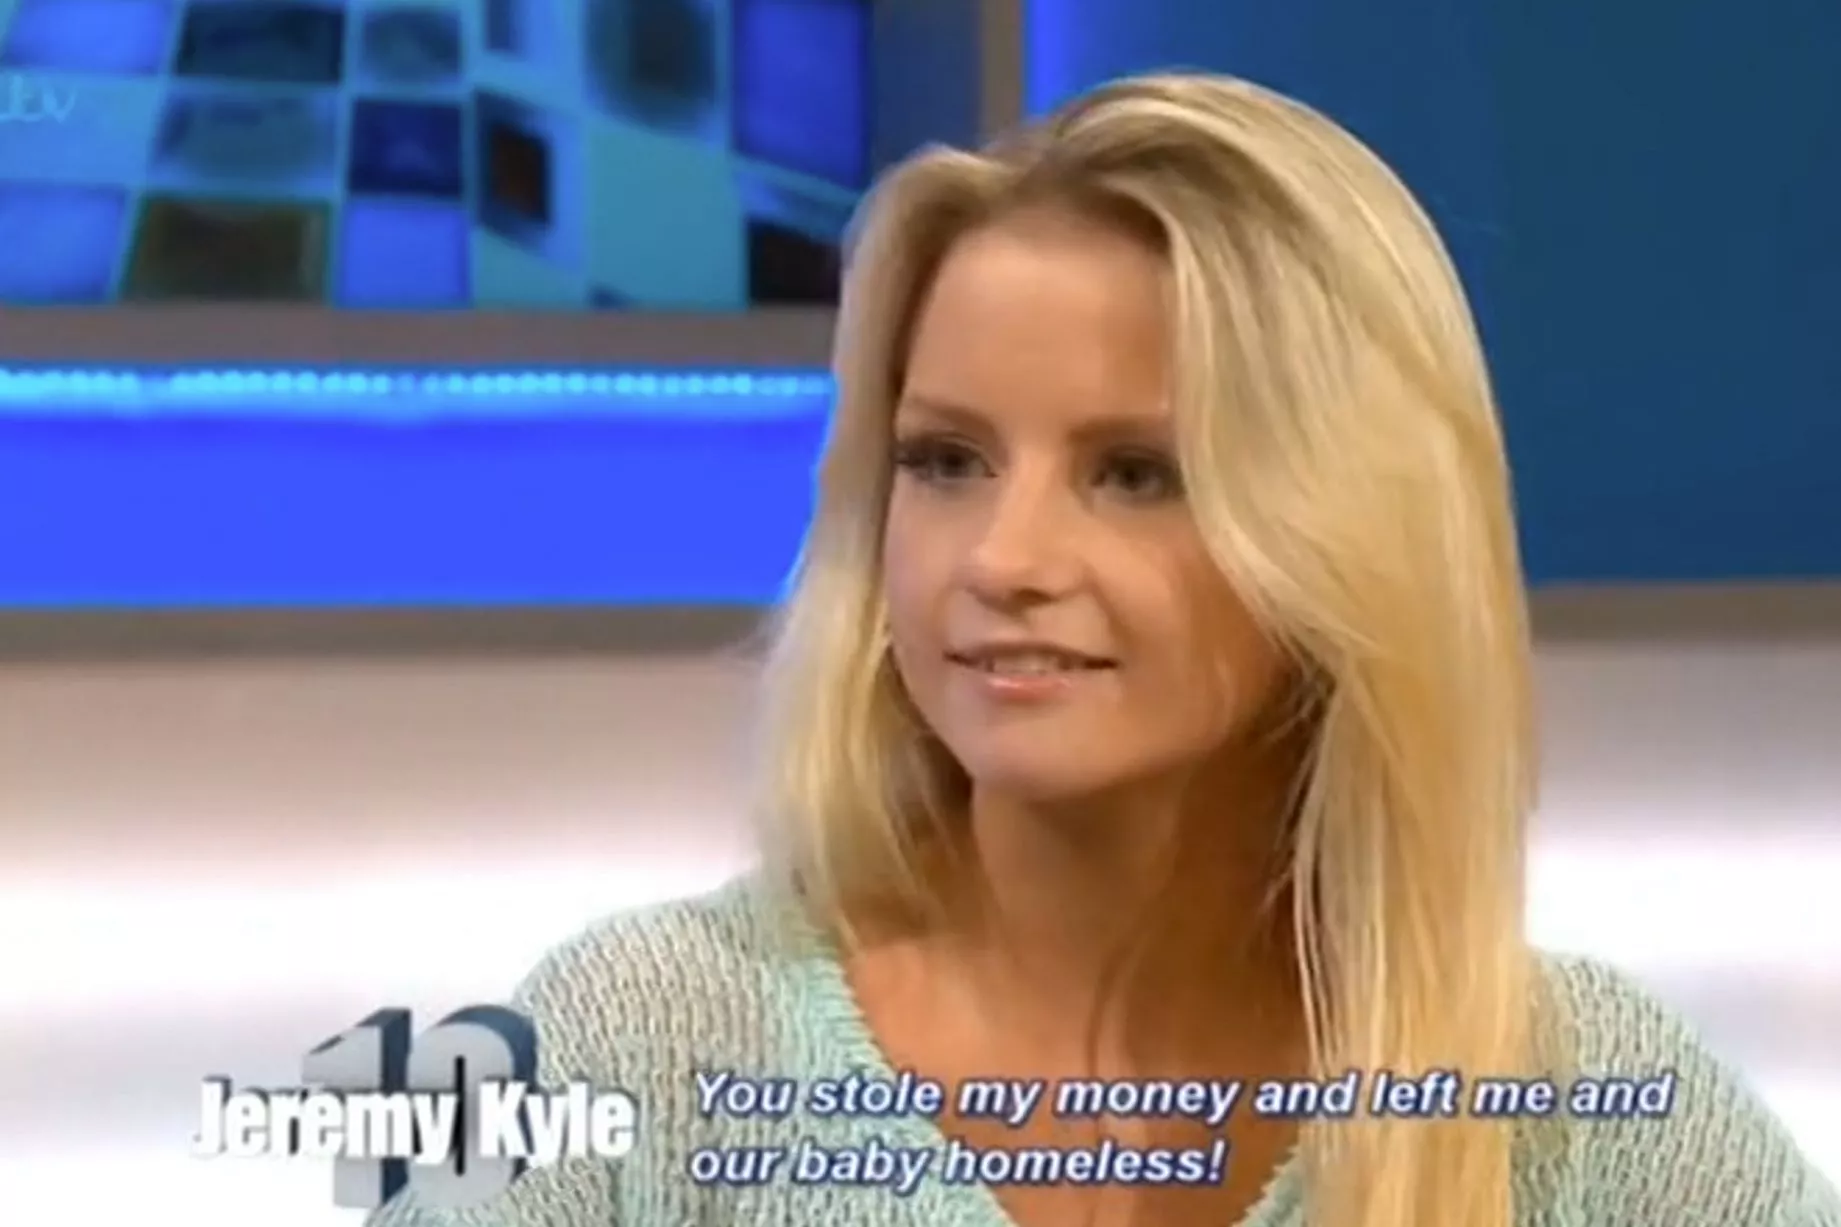 <a href="/hot-men/jeremy-kyle/is-he-air-show-fake-cancelled-british-still">Jeremy Kyle</a> Athletic body,  light brown hair & hairstyles